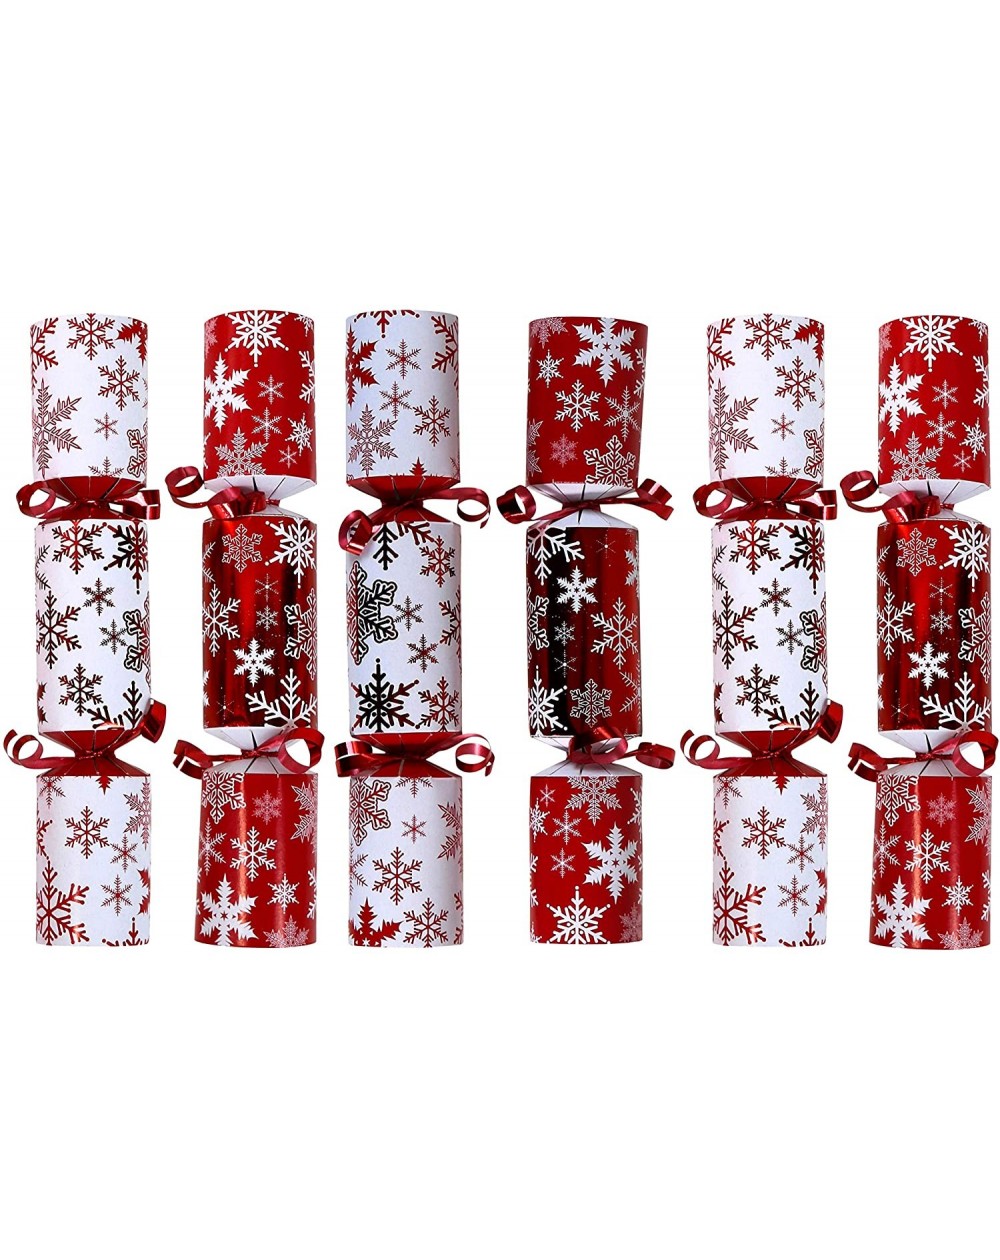 Favors 9-inch Christmas No-Snap Party Favor- Red Snowflakes- 6-Pack - C618LHKS6D9 $11.10